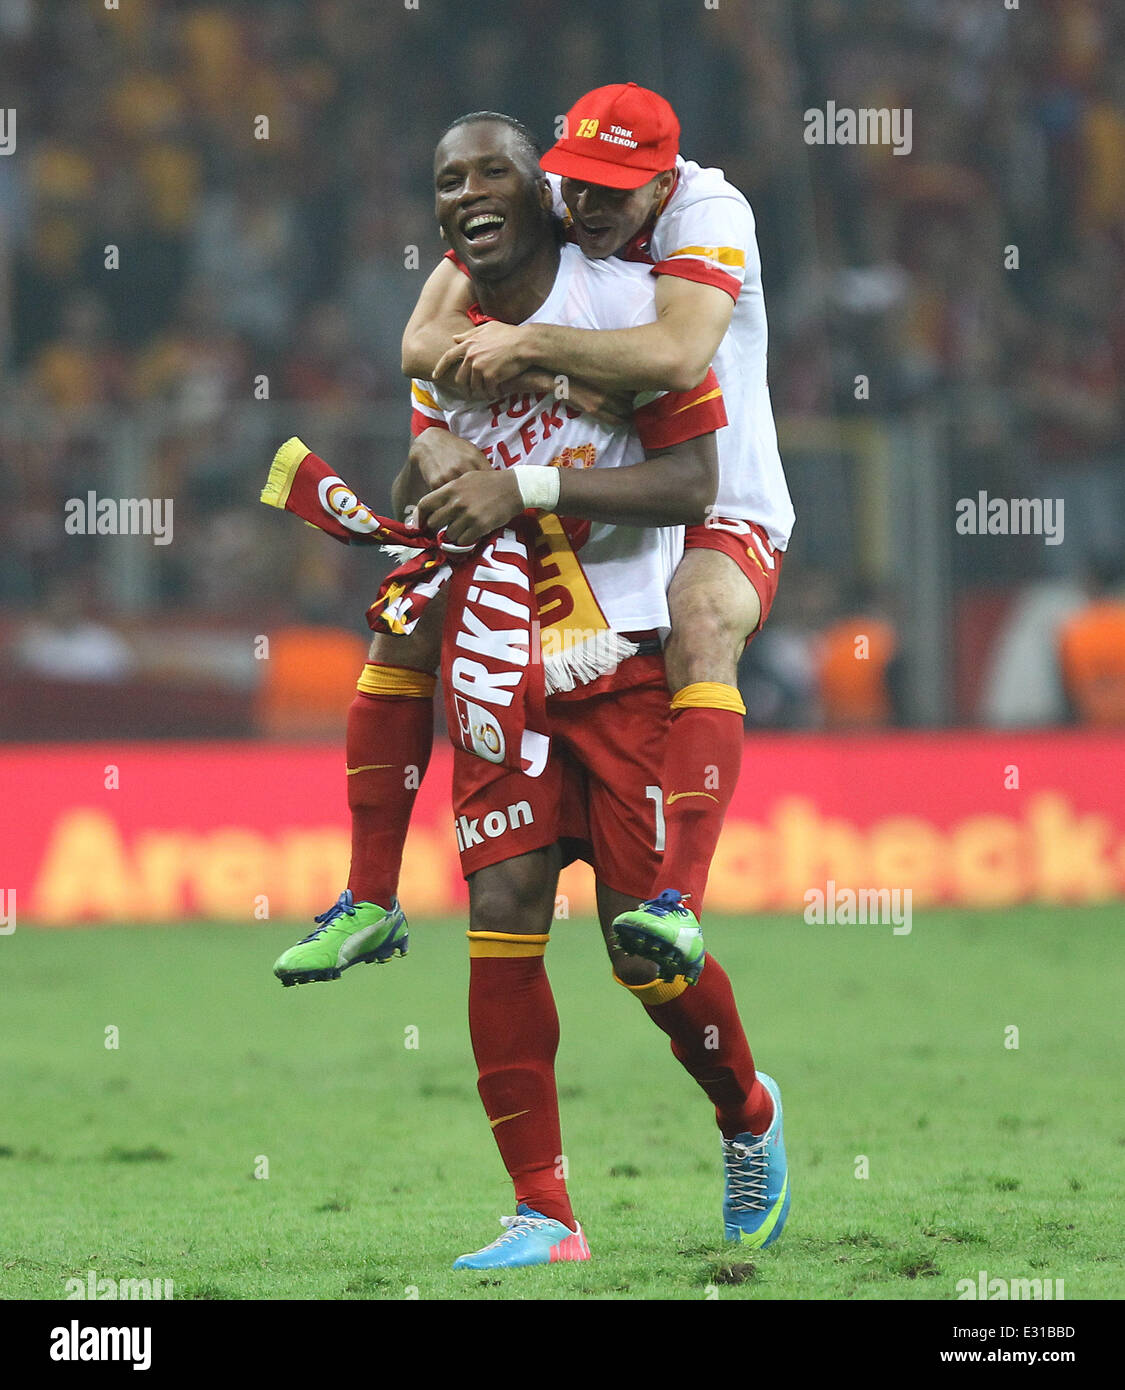 Galatasaray Football club win their 19th Spor Toto Super League title after victory over Sivasspor at Turk Telekom Arena Stadium in Istanbul Match Score: Galatasaray 4 - Sivasspor 2  Featuring: Didier Drogba Where: Istanbul, Turkey When: 05 May 2013 Stock Photo